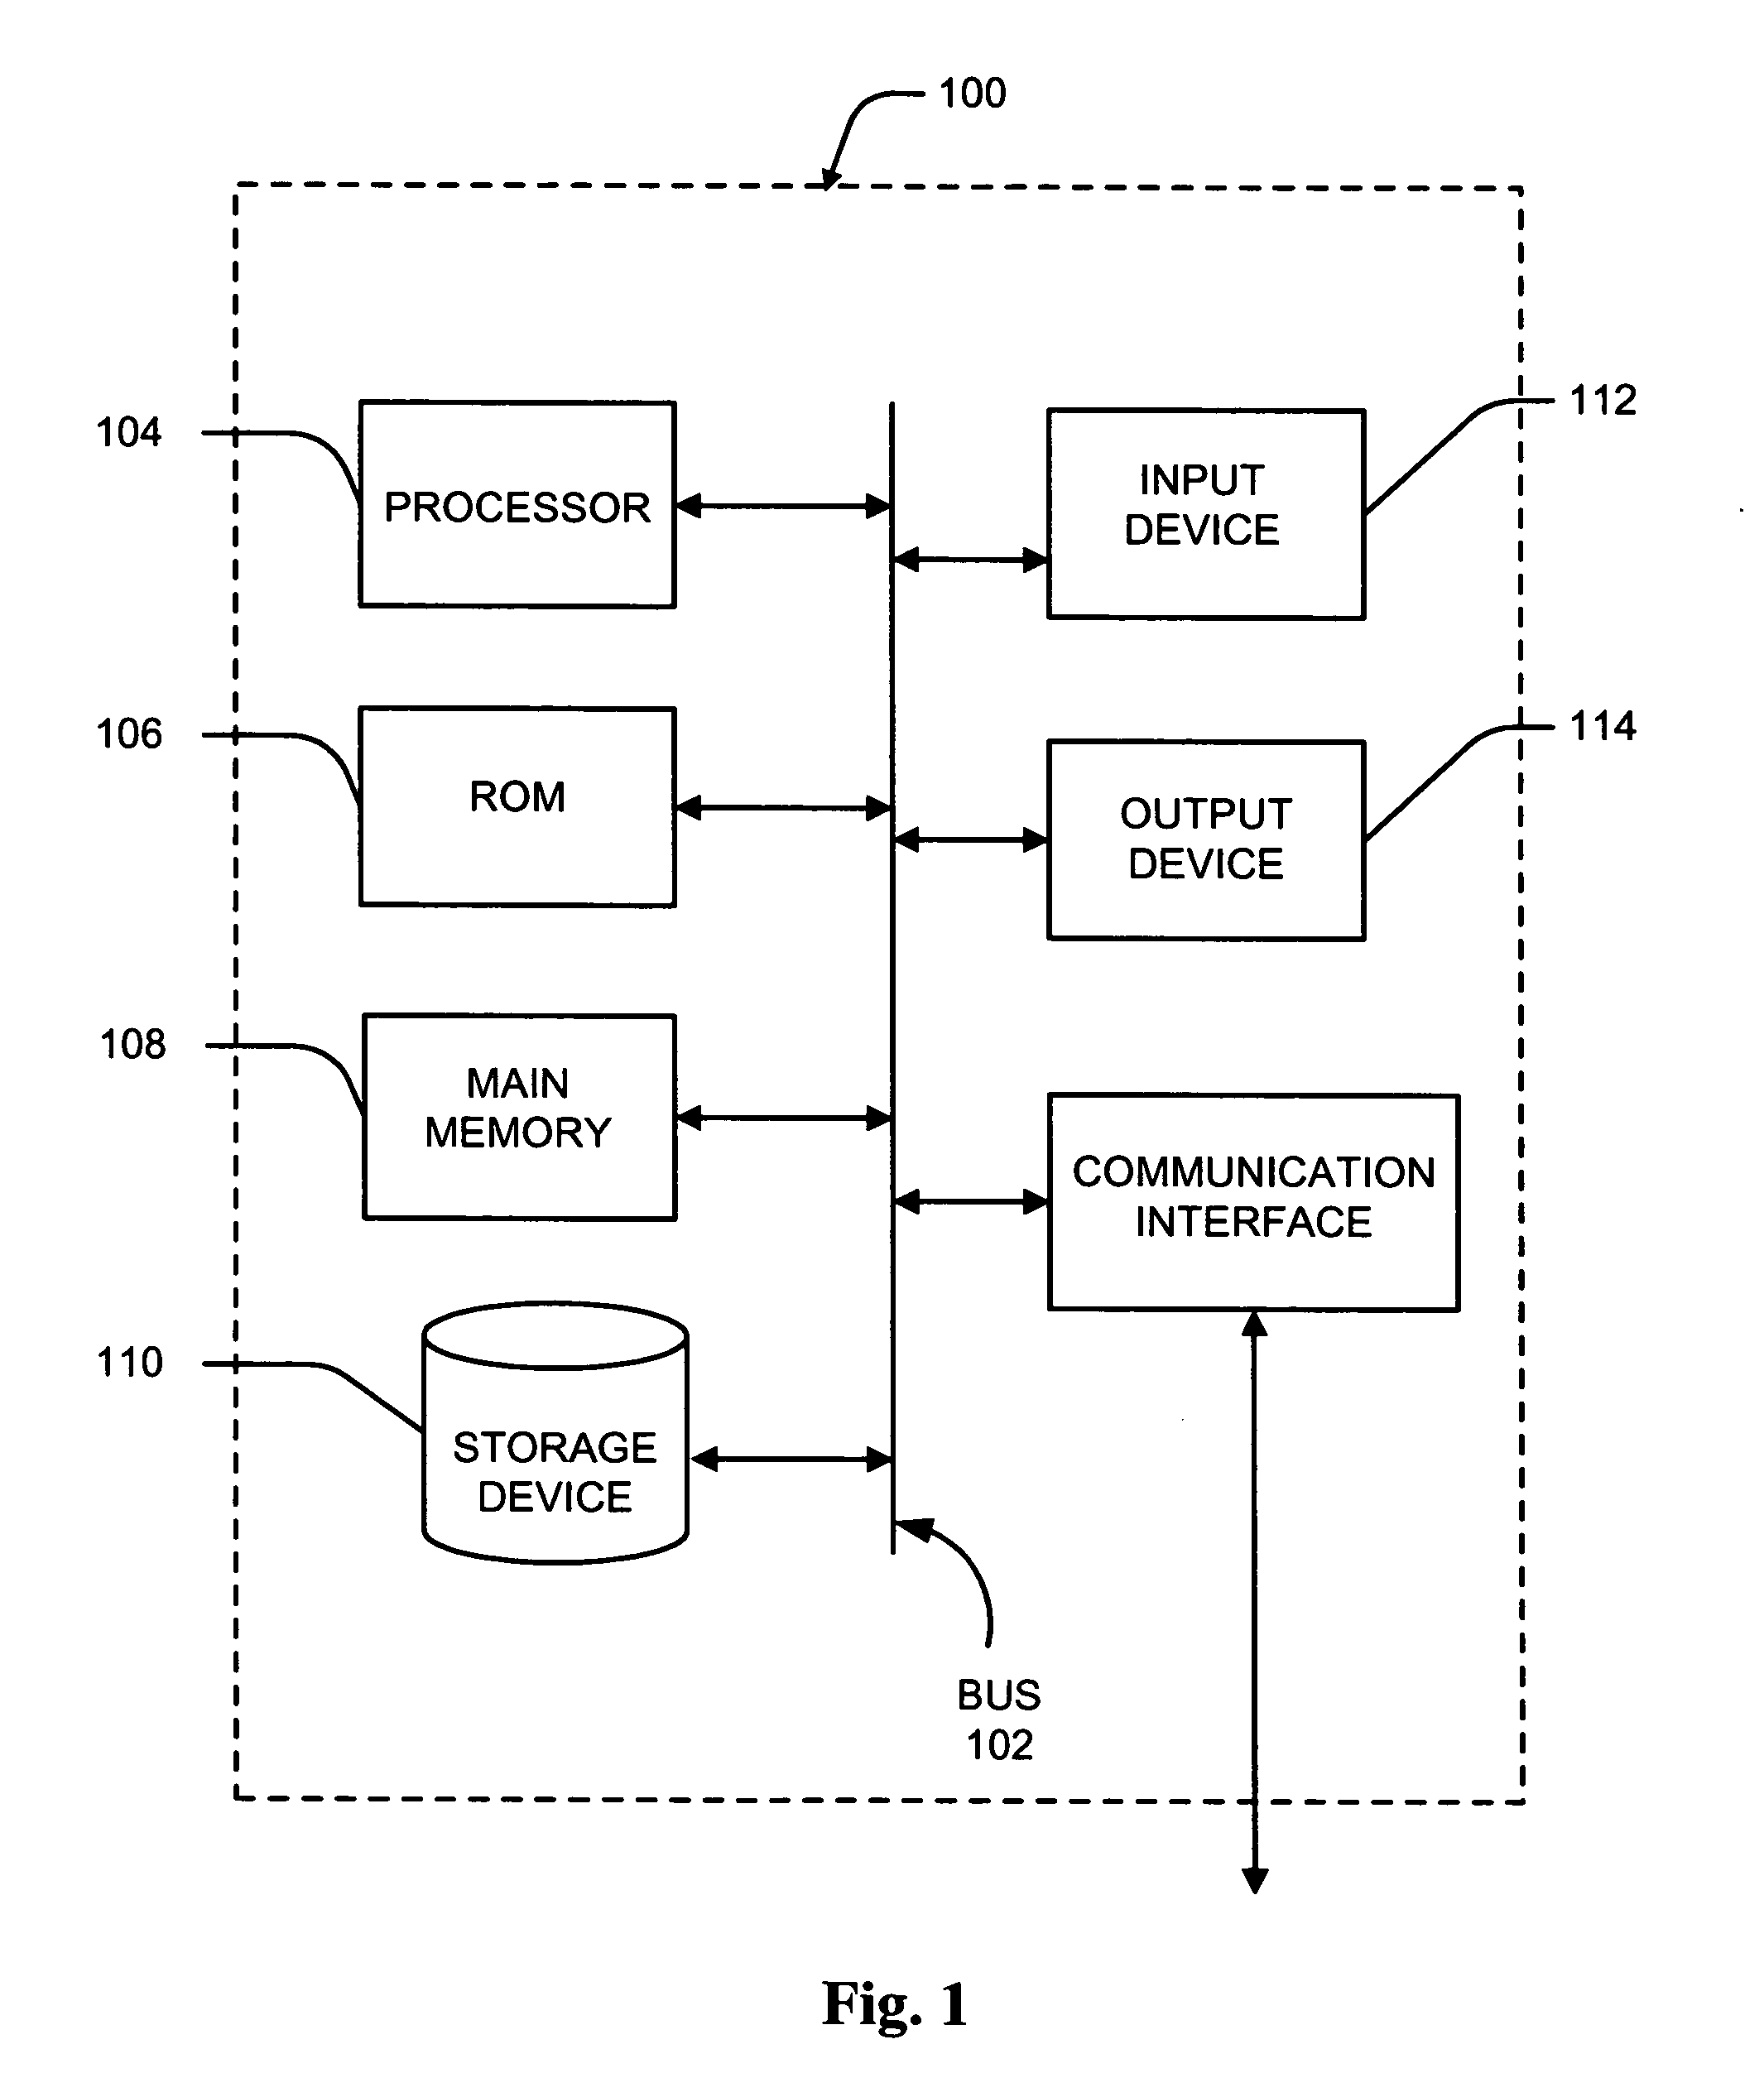 Computer-implemented system and method for automated and highly accurate plaque analysis, reporting, and visualization